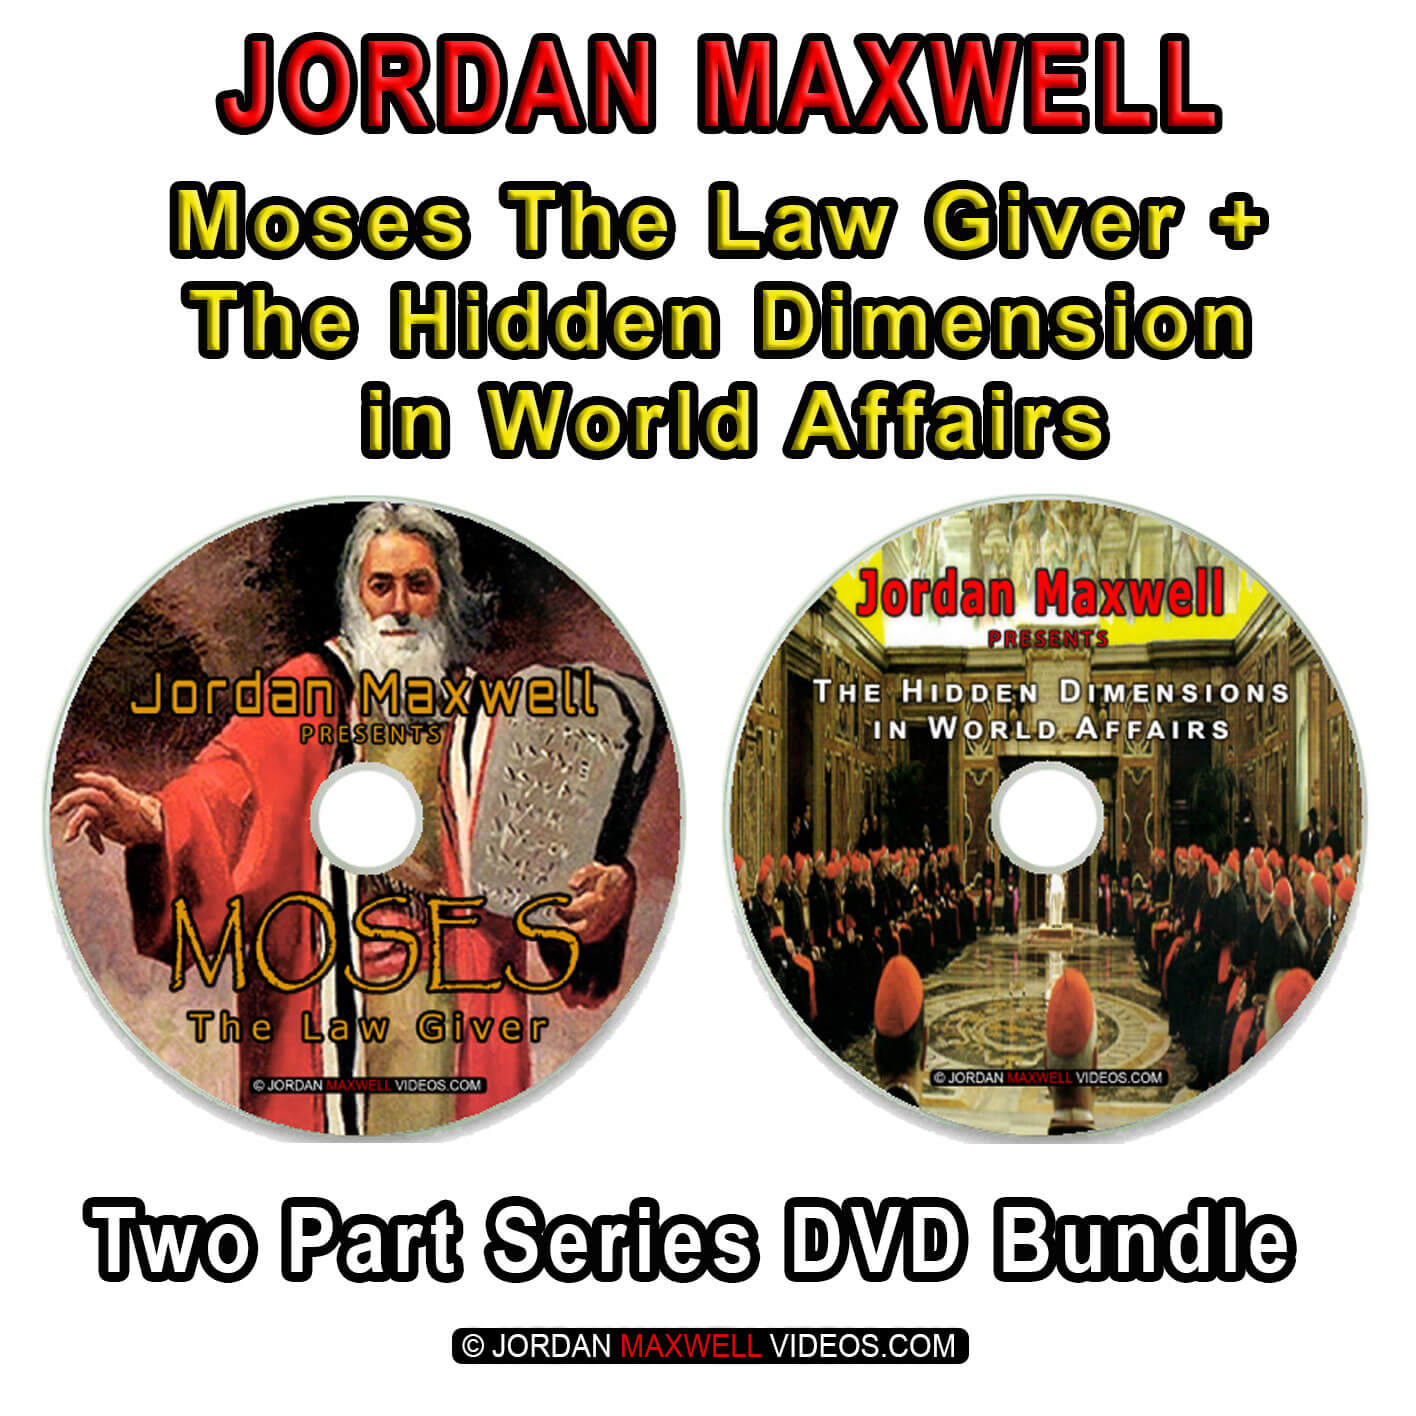 Jordan Maxwell - Moses the law giver - DVD